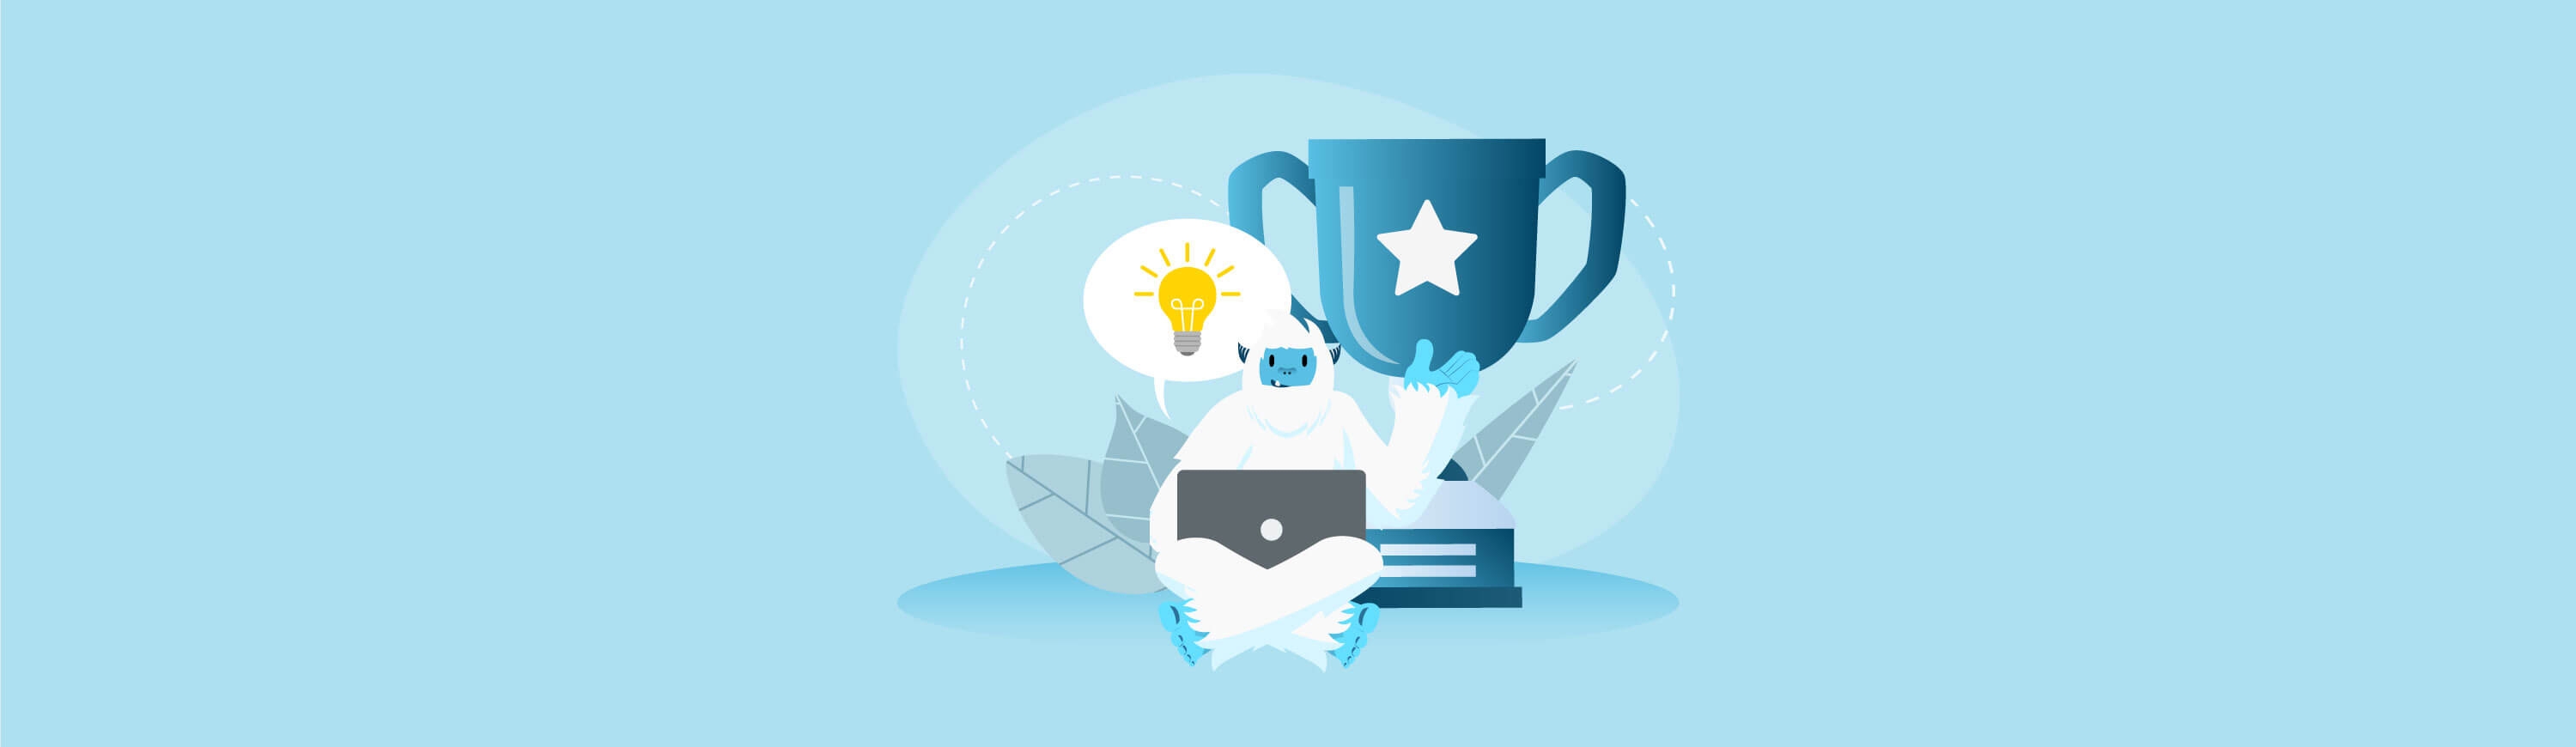 Illustration of Carl the yeti sitting on the floor on his laptop. There is a trophy and lightbulb hovering above him.